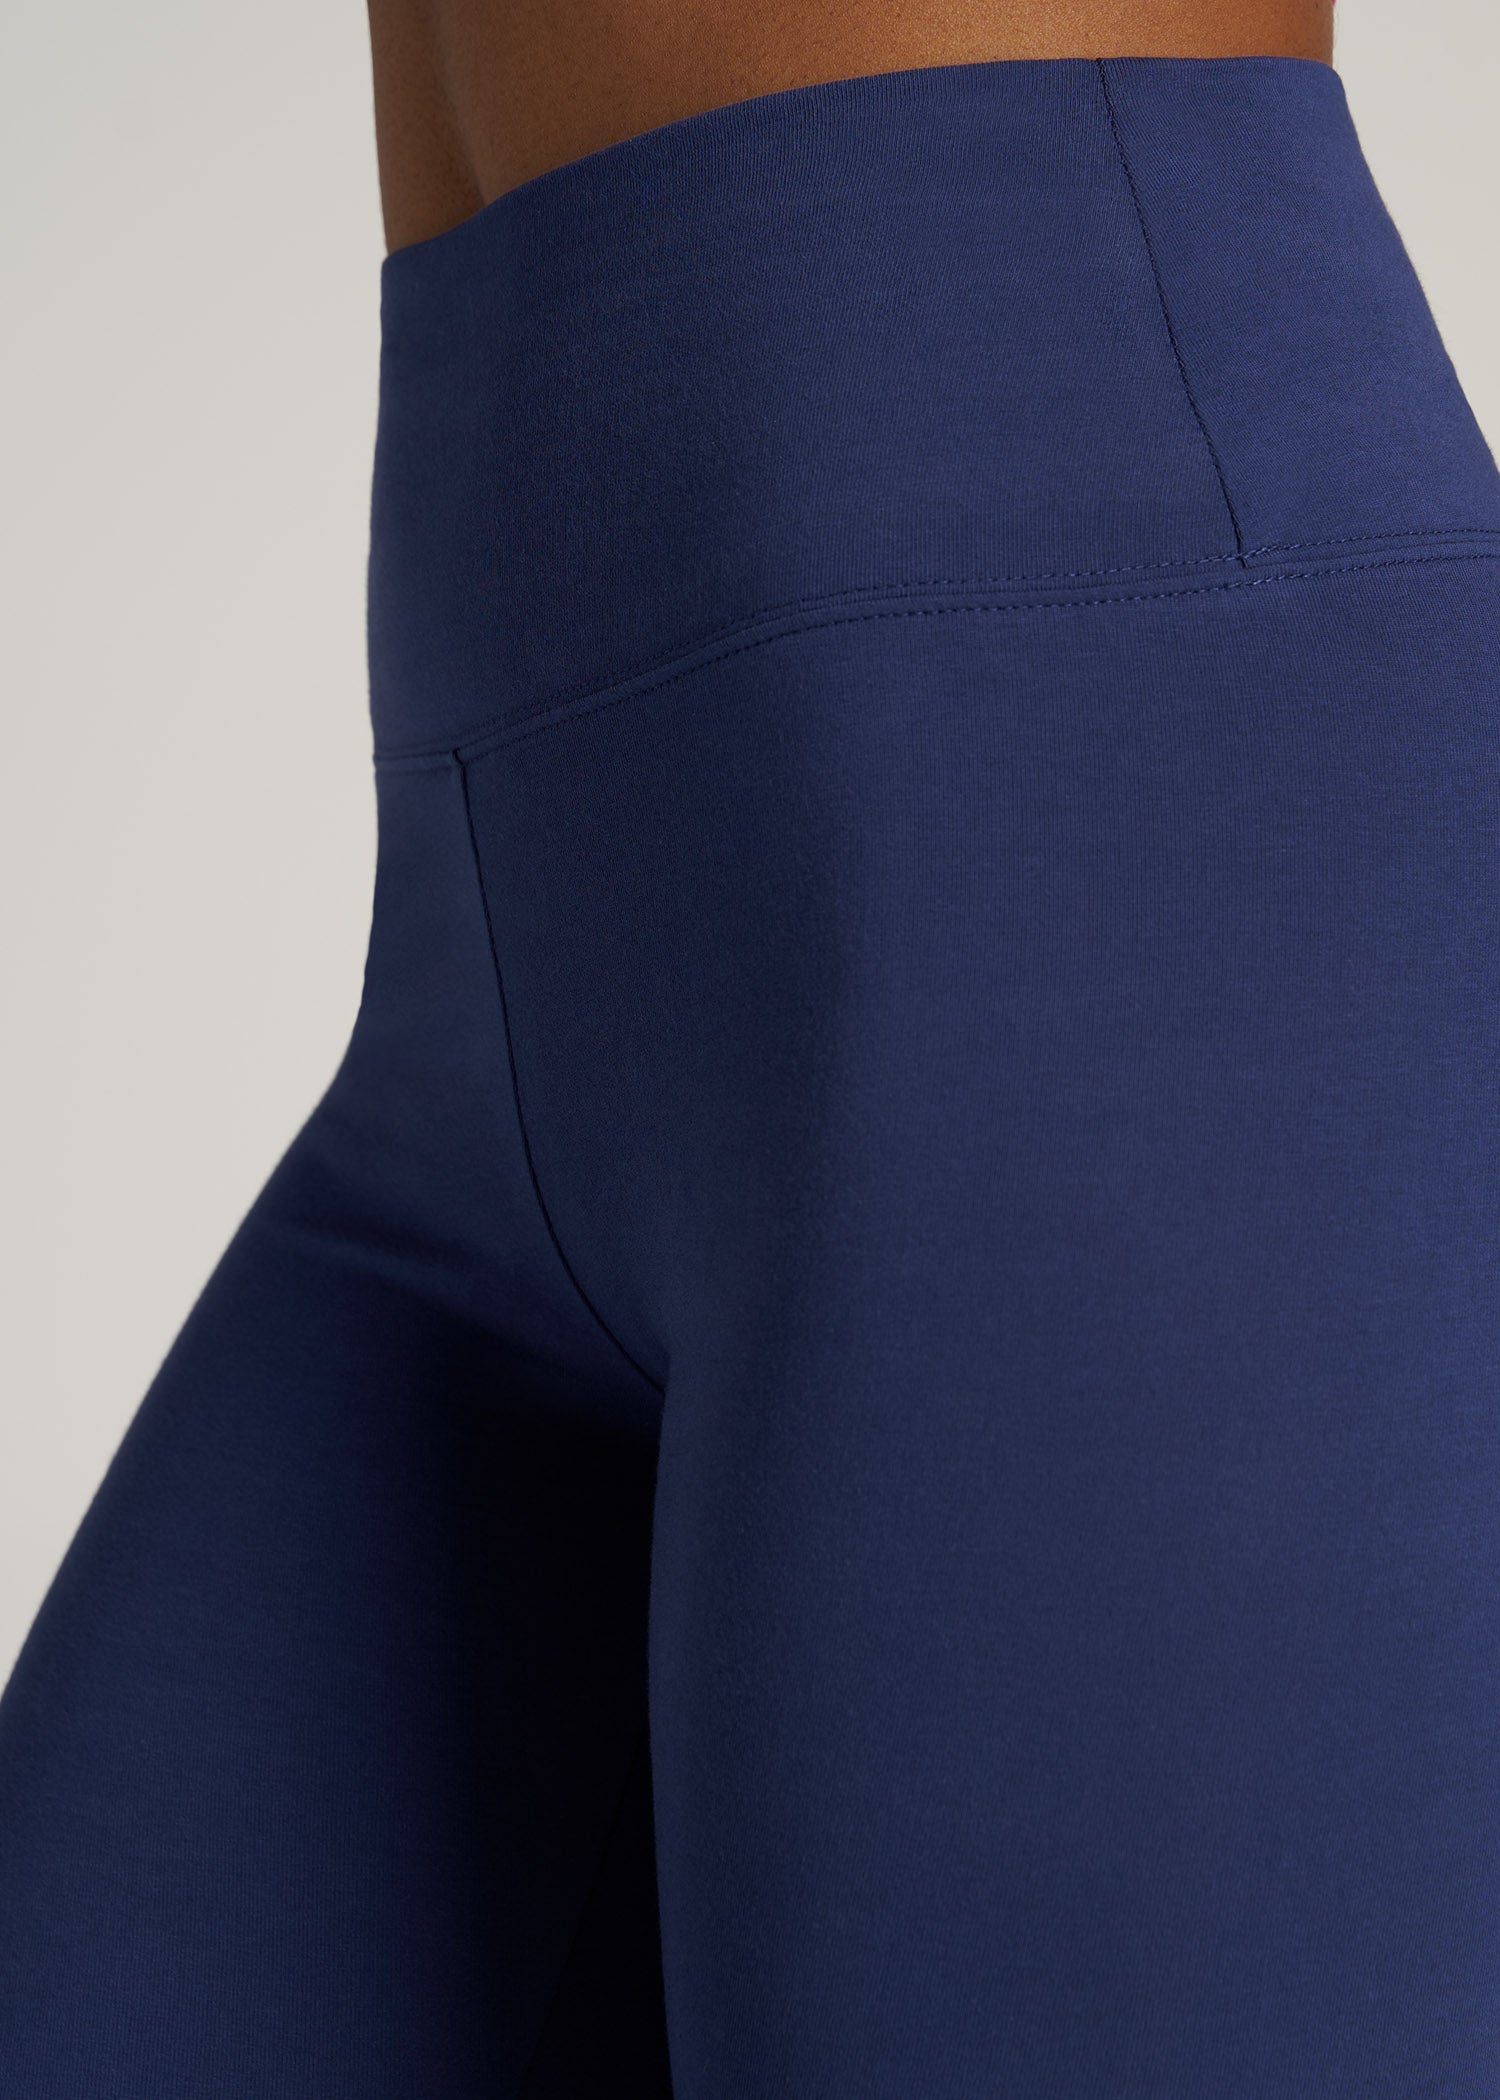 Tall Women's Legging With Pockets Navy